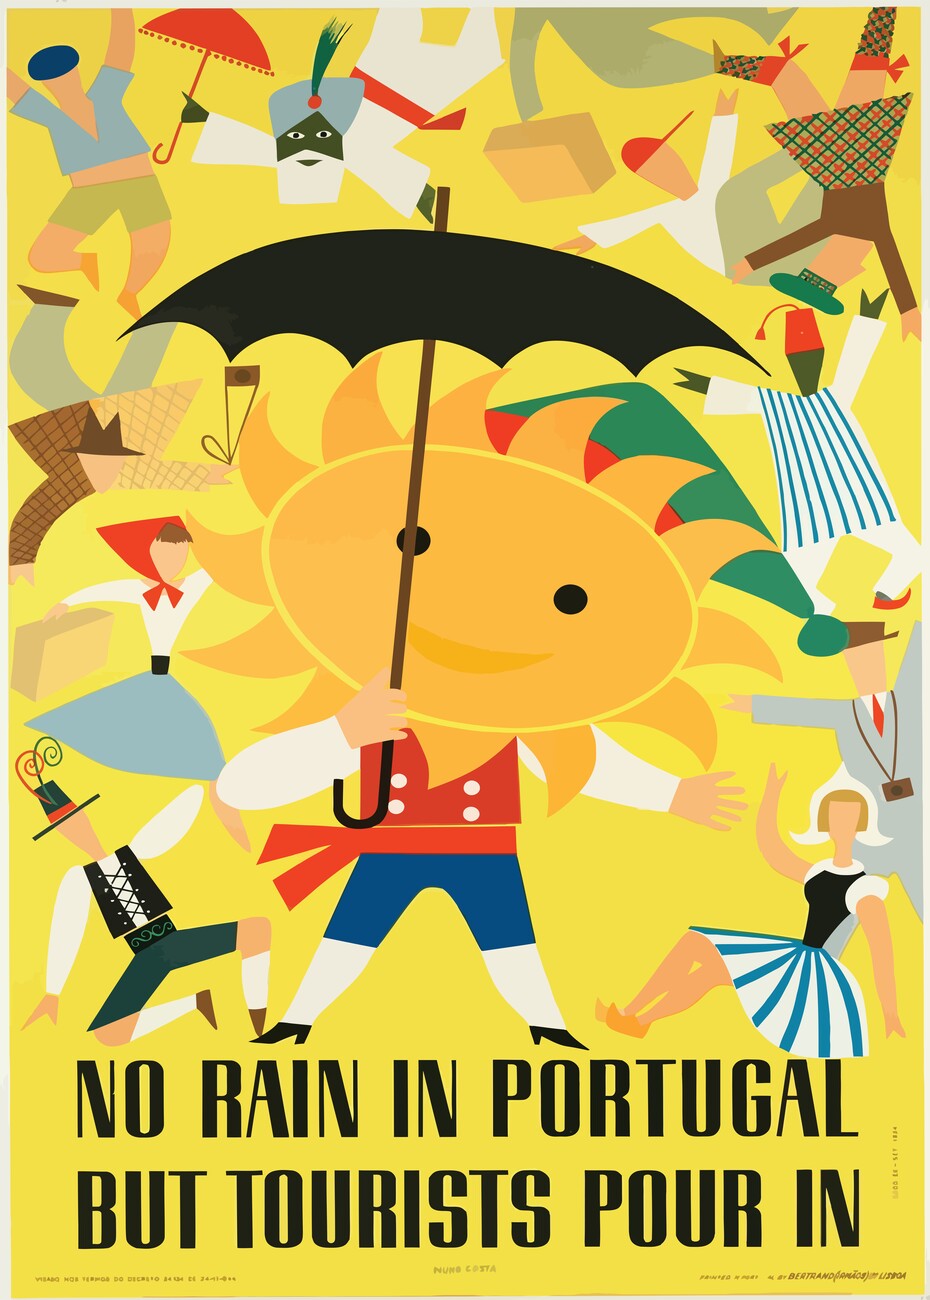 Wallpaper Mural No Rain in Portugal But Tourists Pour In